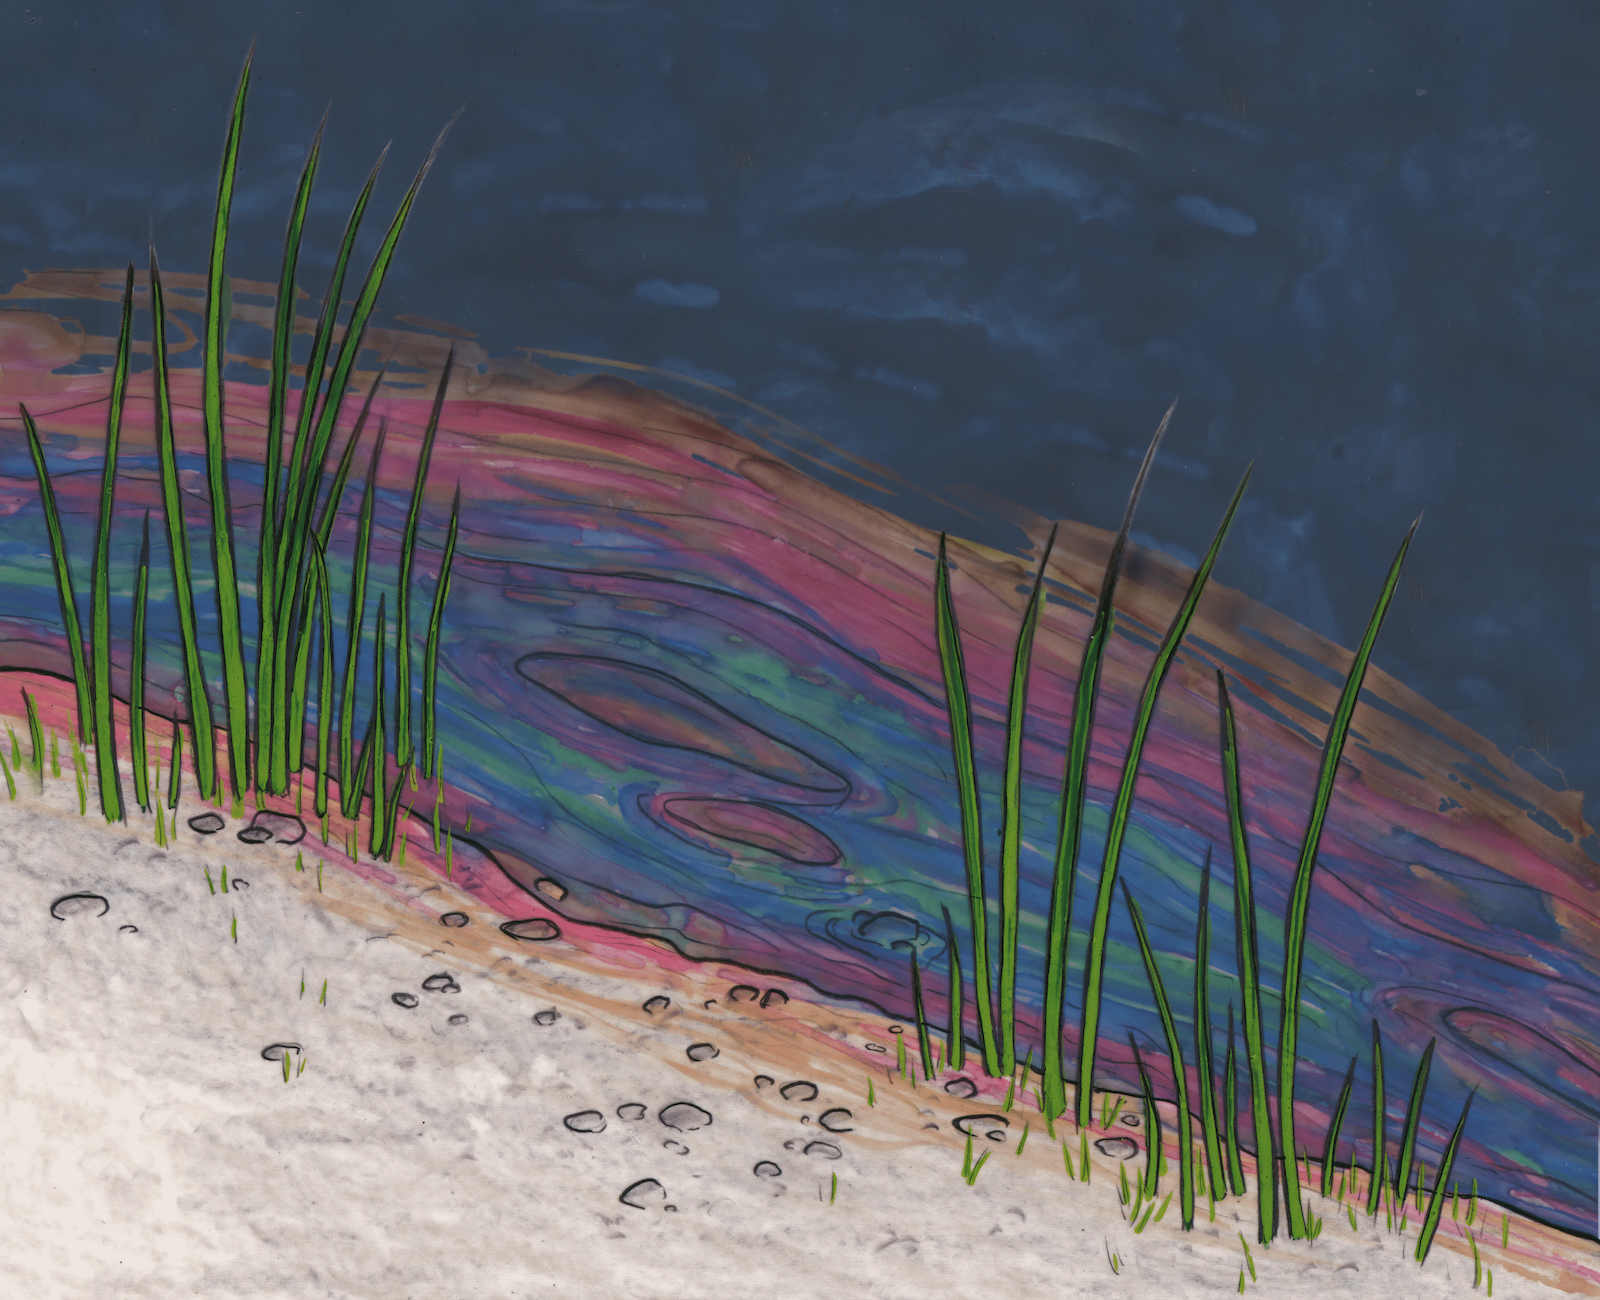 Oil sheen over the water with long grass along the shoreline. 